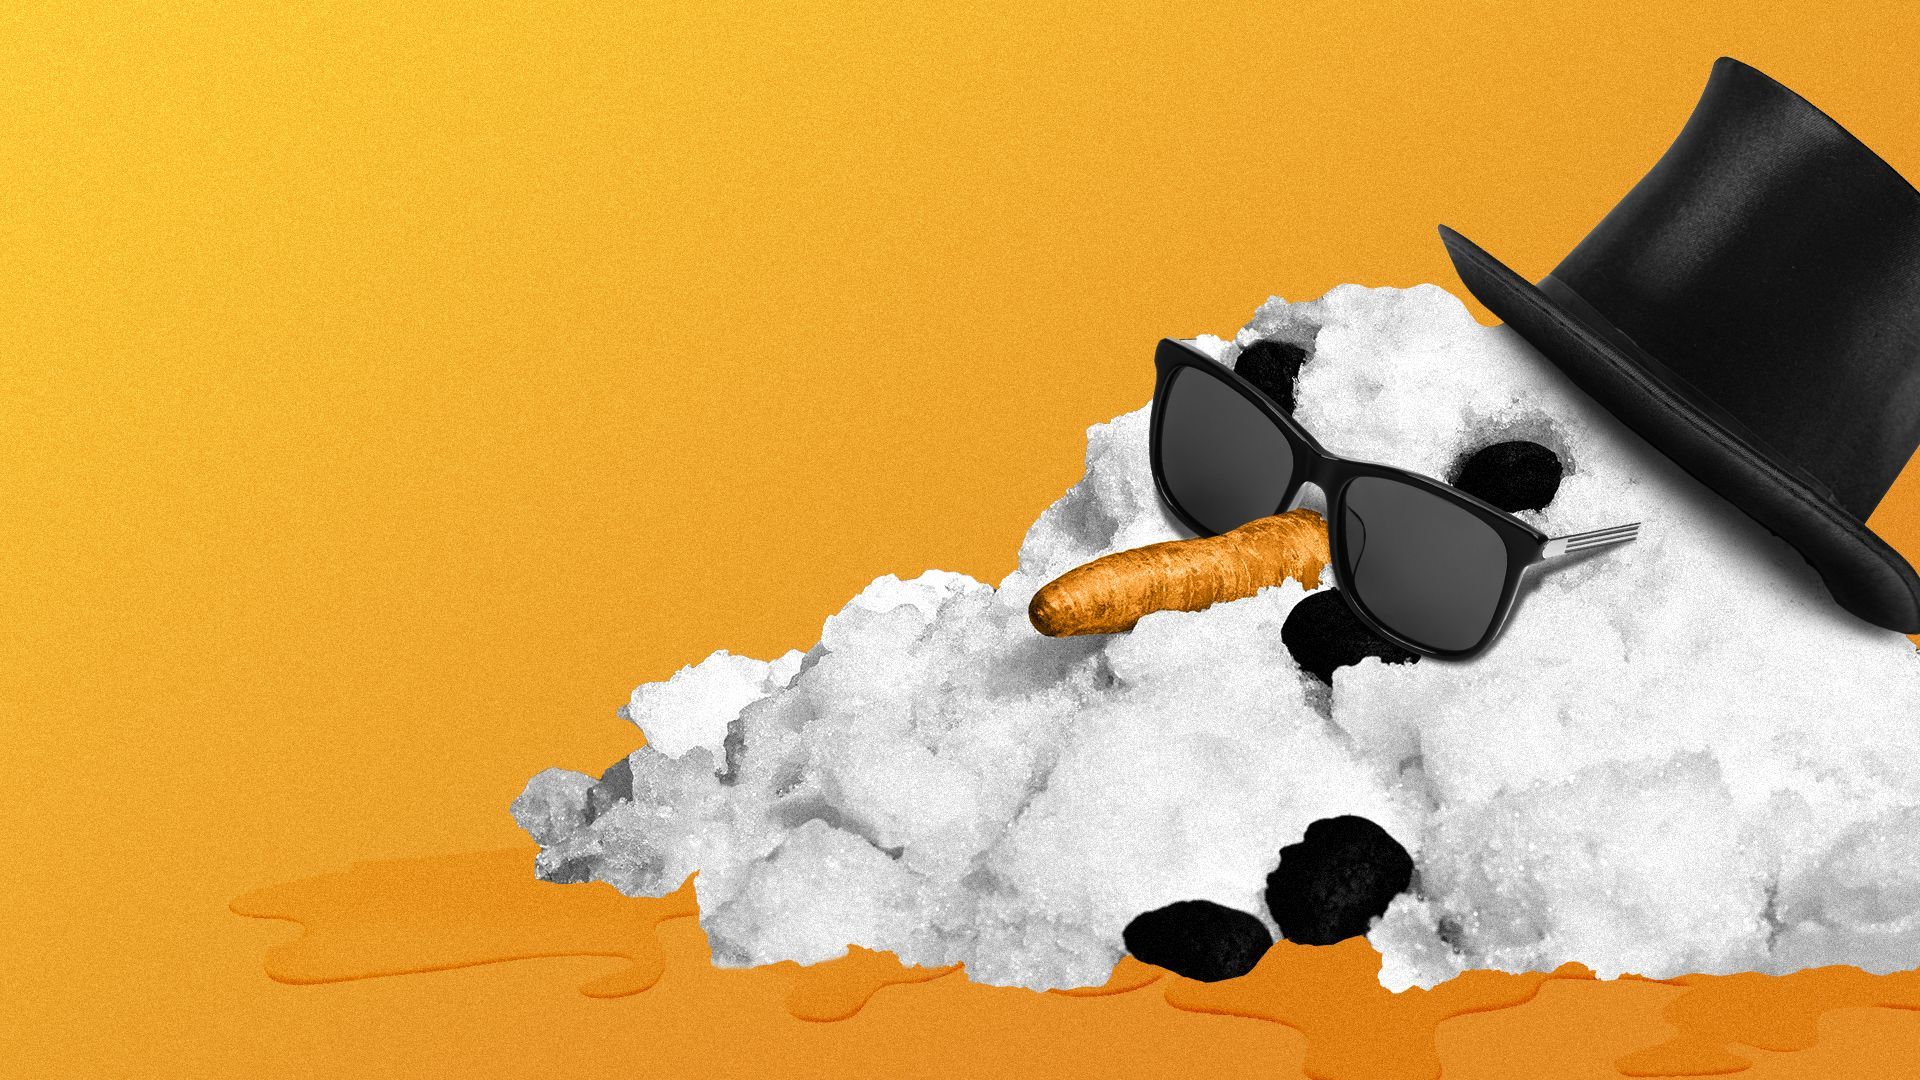 Illustration of a melted snowman wearing sunglasses.